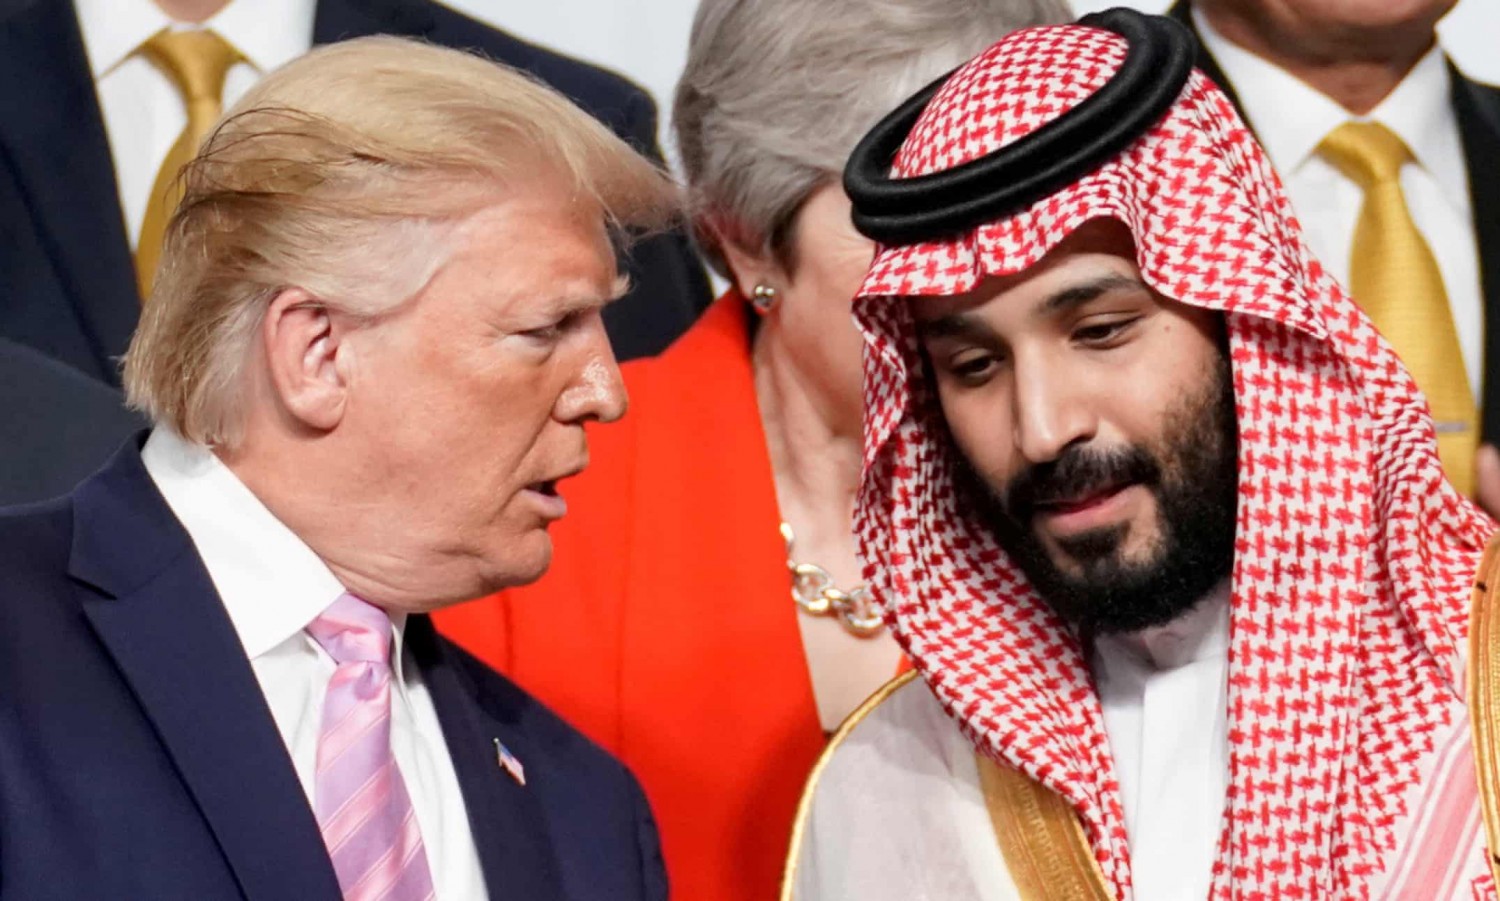 Donald Trump ,speaks to Mohammed bin Salman at the G20 summit in Osaka, Japan in June 2019. Photograph: Kevin Lamarque/Reuters